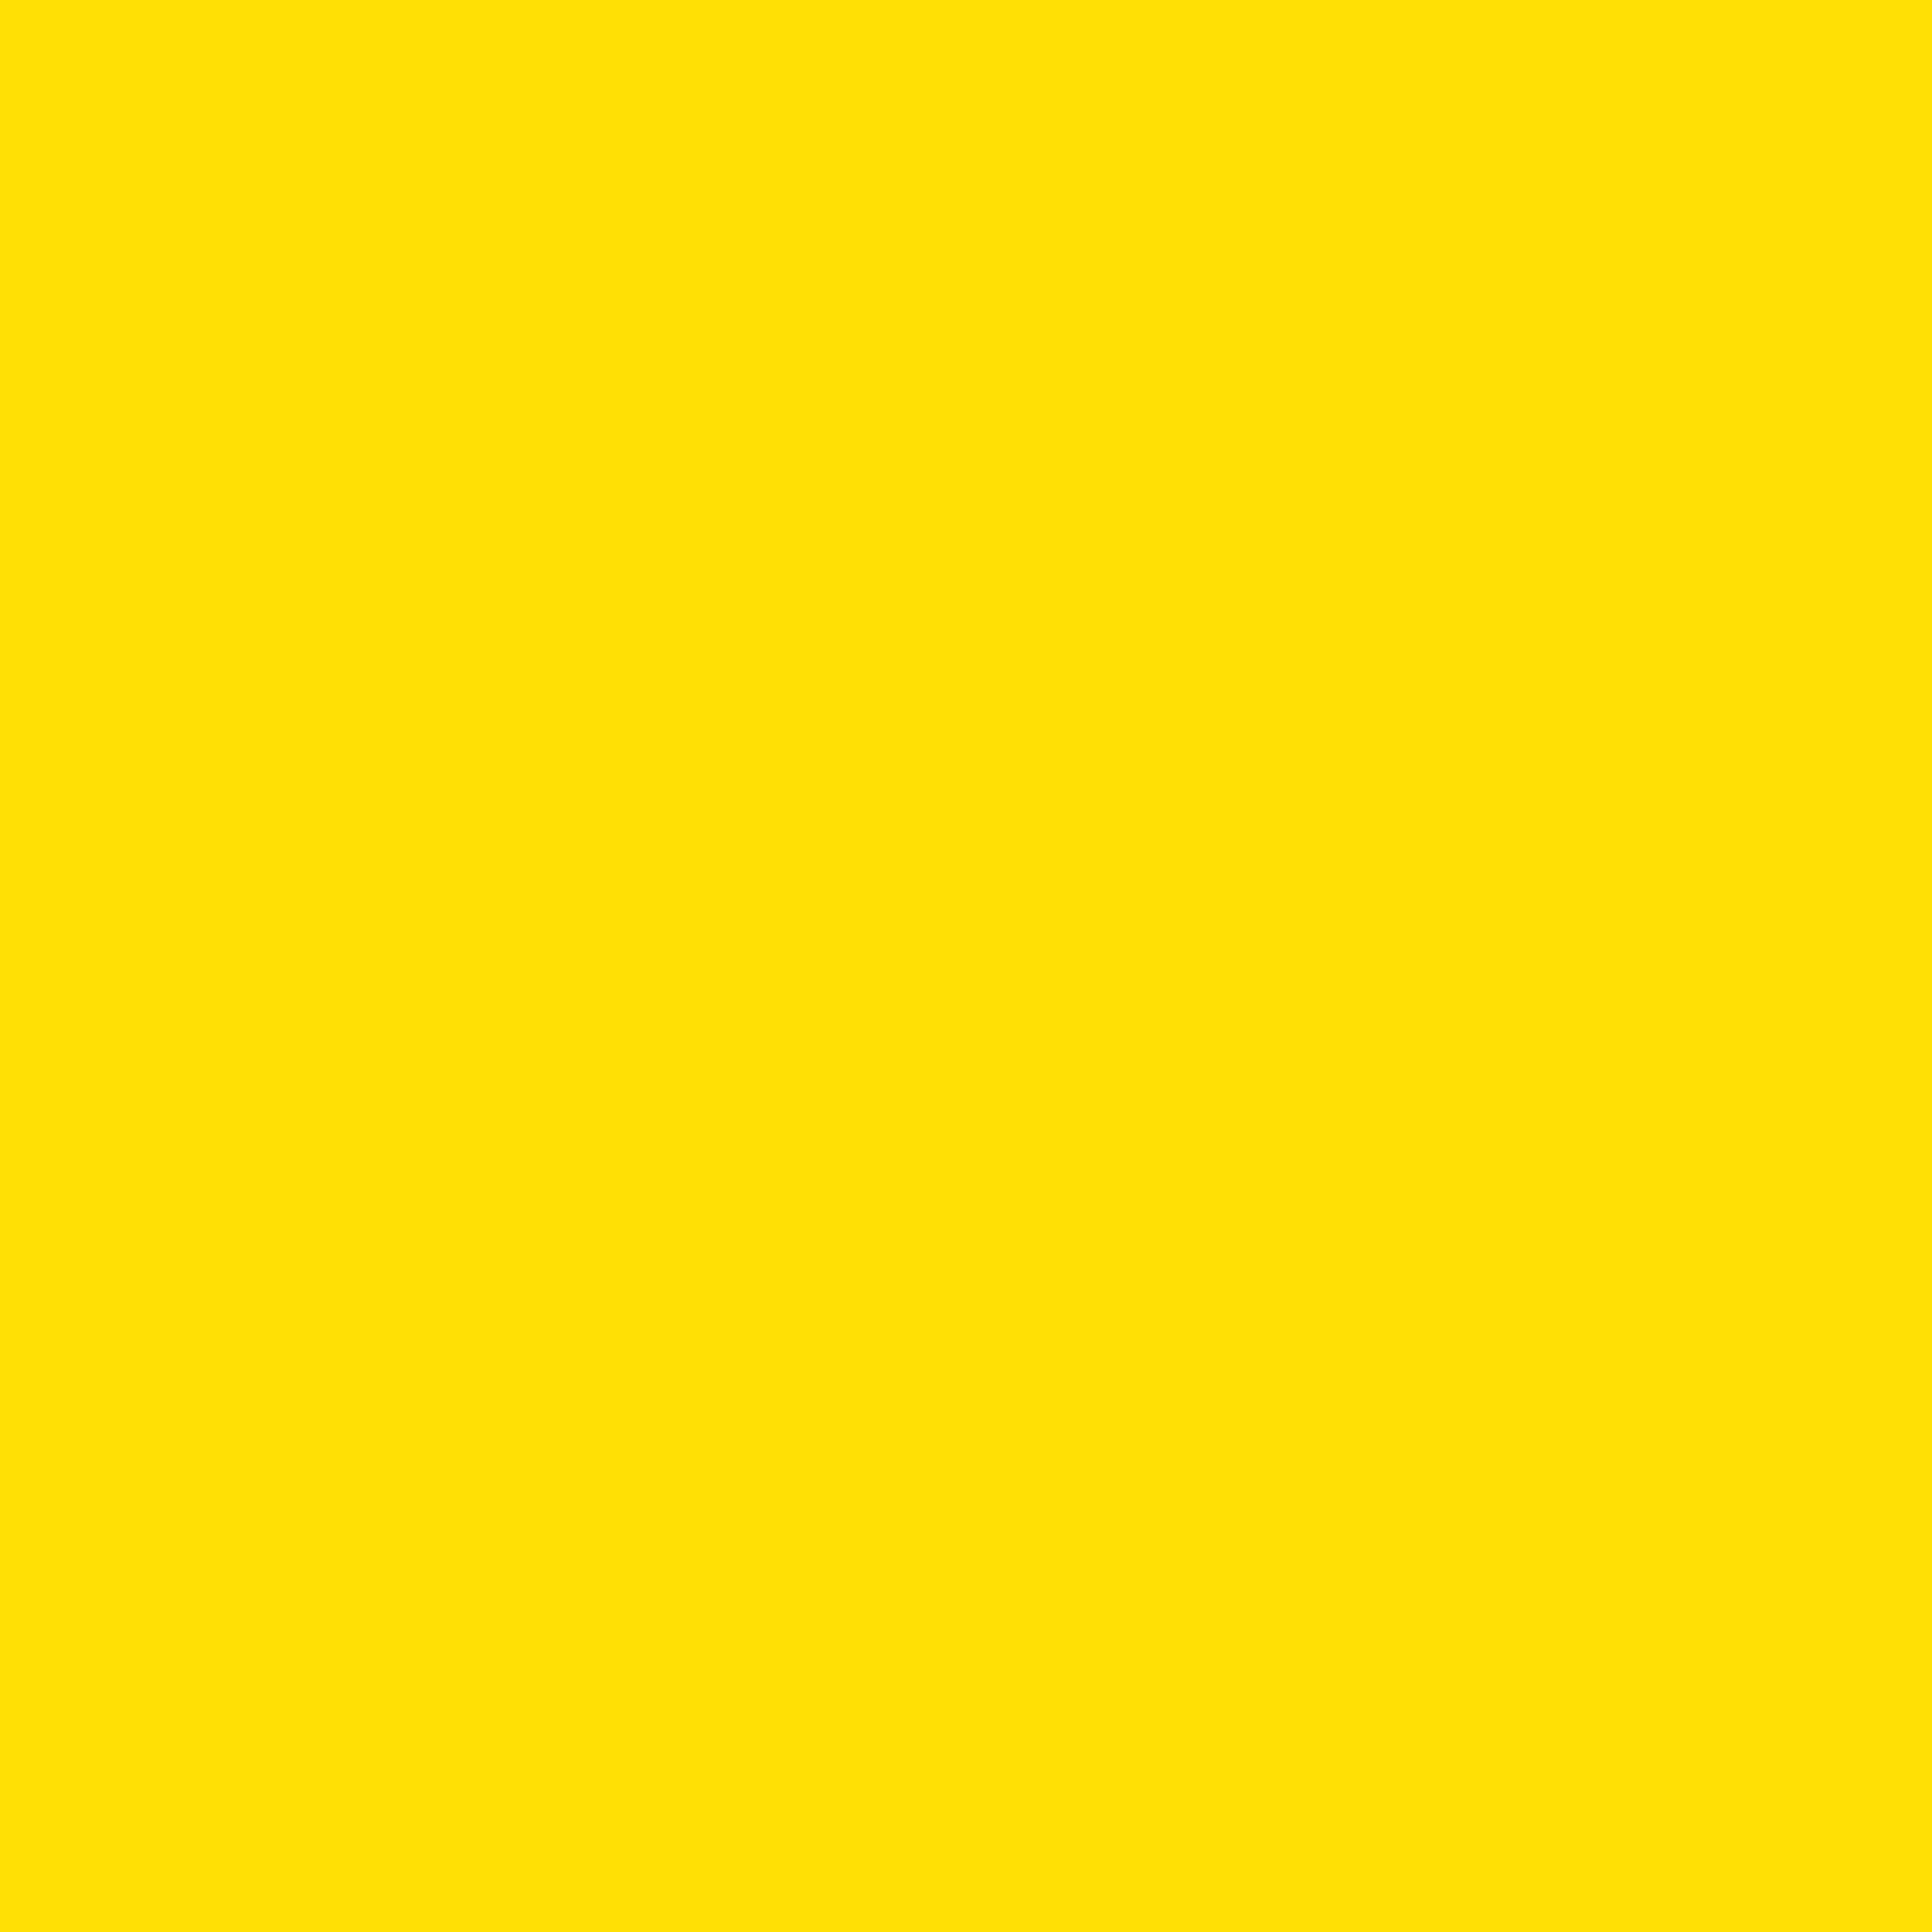 2732x2732 Yellow Pantone Solid Color Background